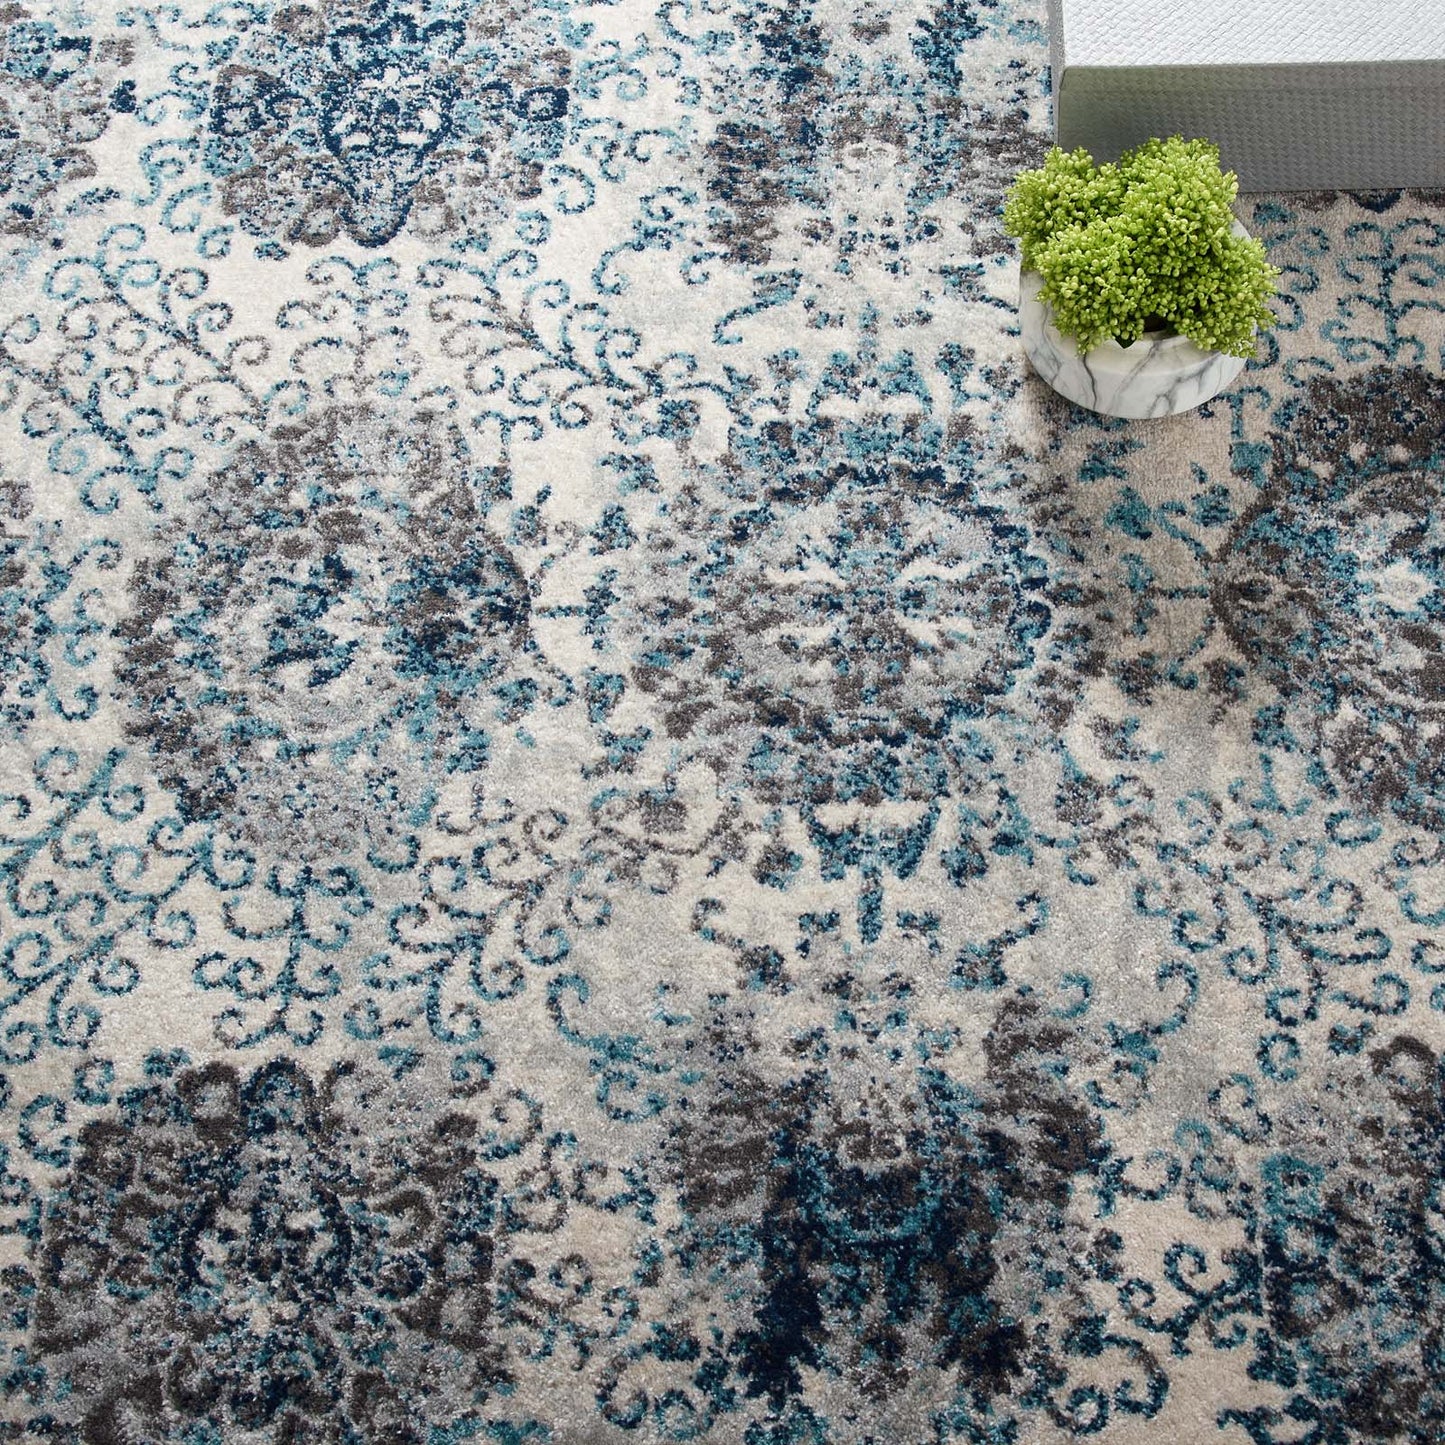 Entourage Kensie Distressed Floral Moroccan Trellis  8x10 Area Rug Ivory and Blue R-1173B-810